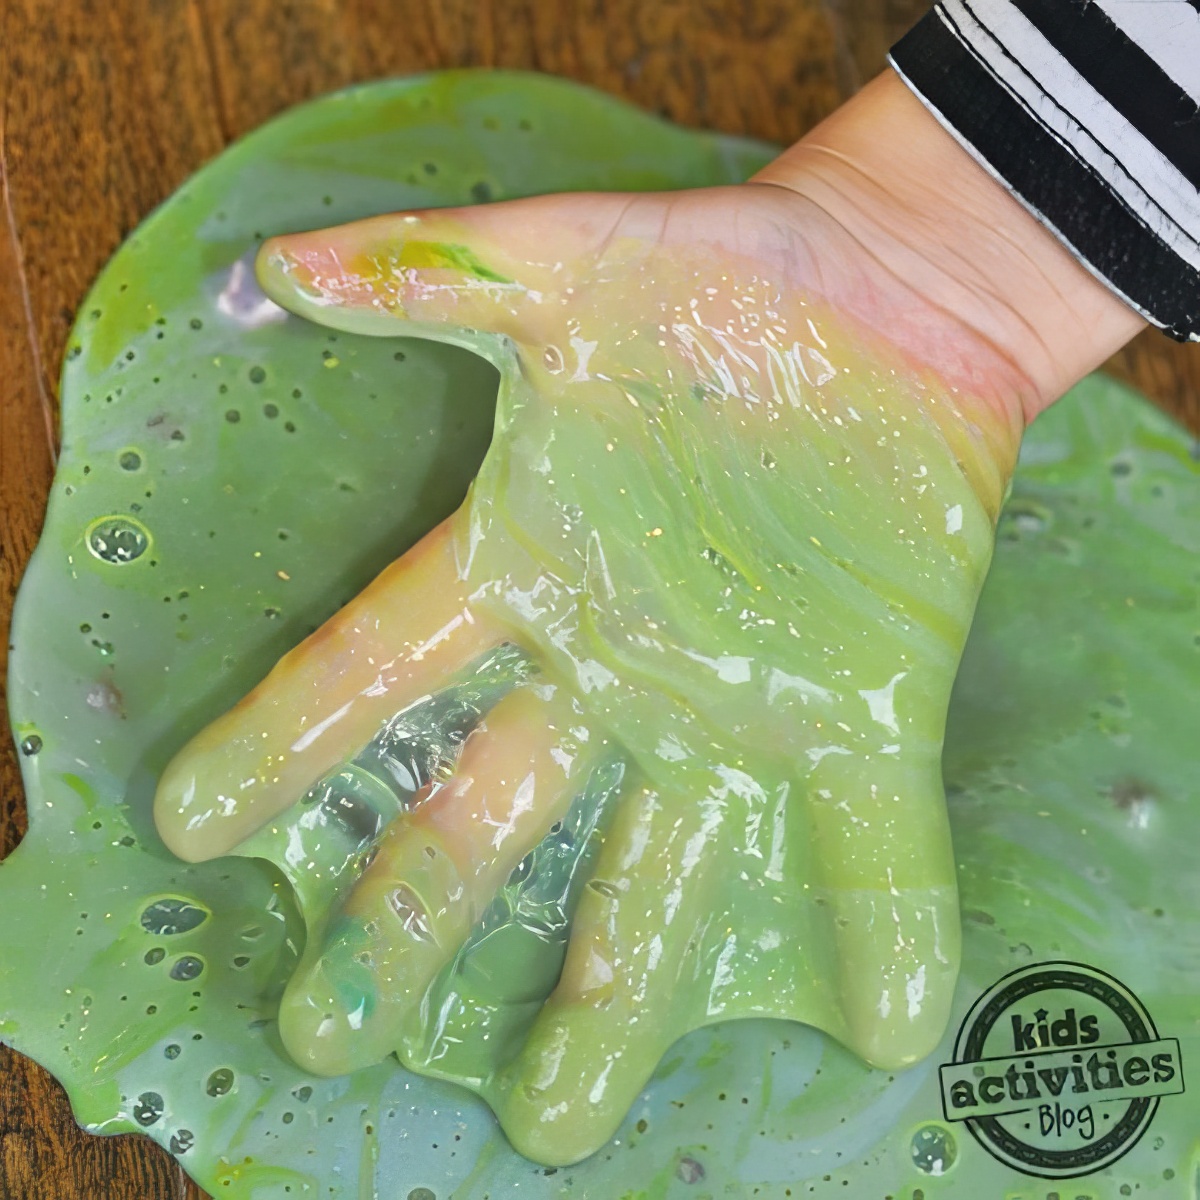 Make that grossest-slime-recipe for you kids to enjoy this April Fools!